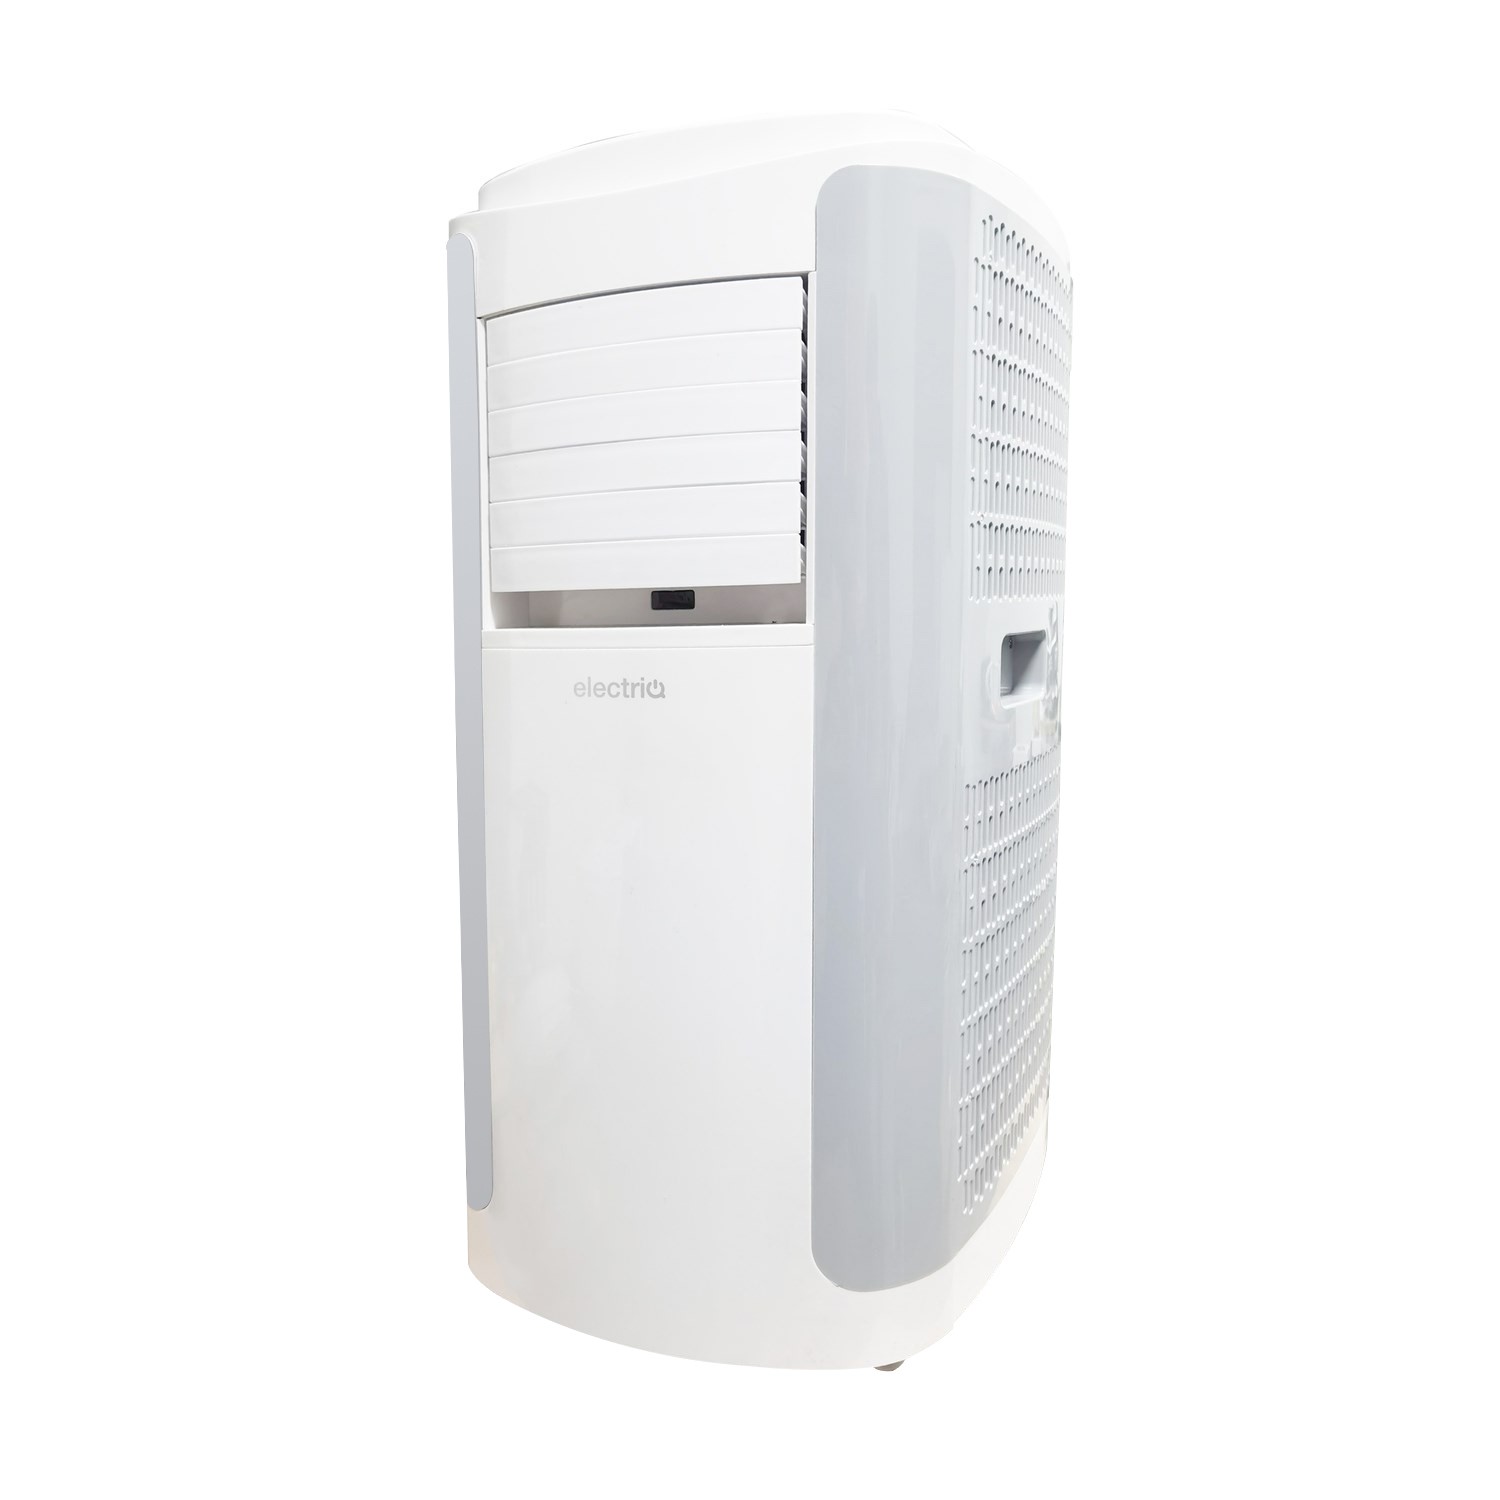 Slim & Portable Air Con Unit by electriQ - Rooms up to 30m²